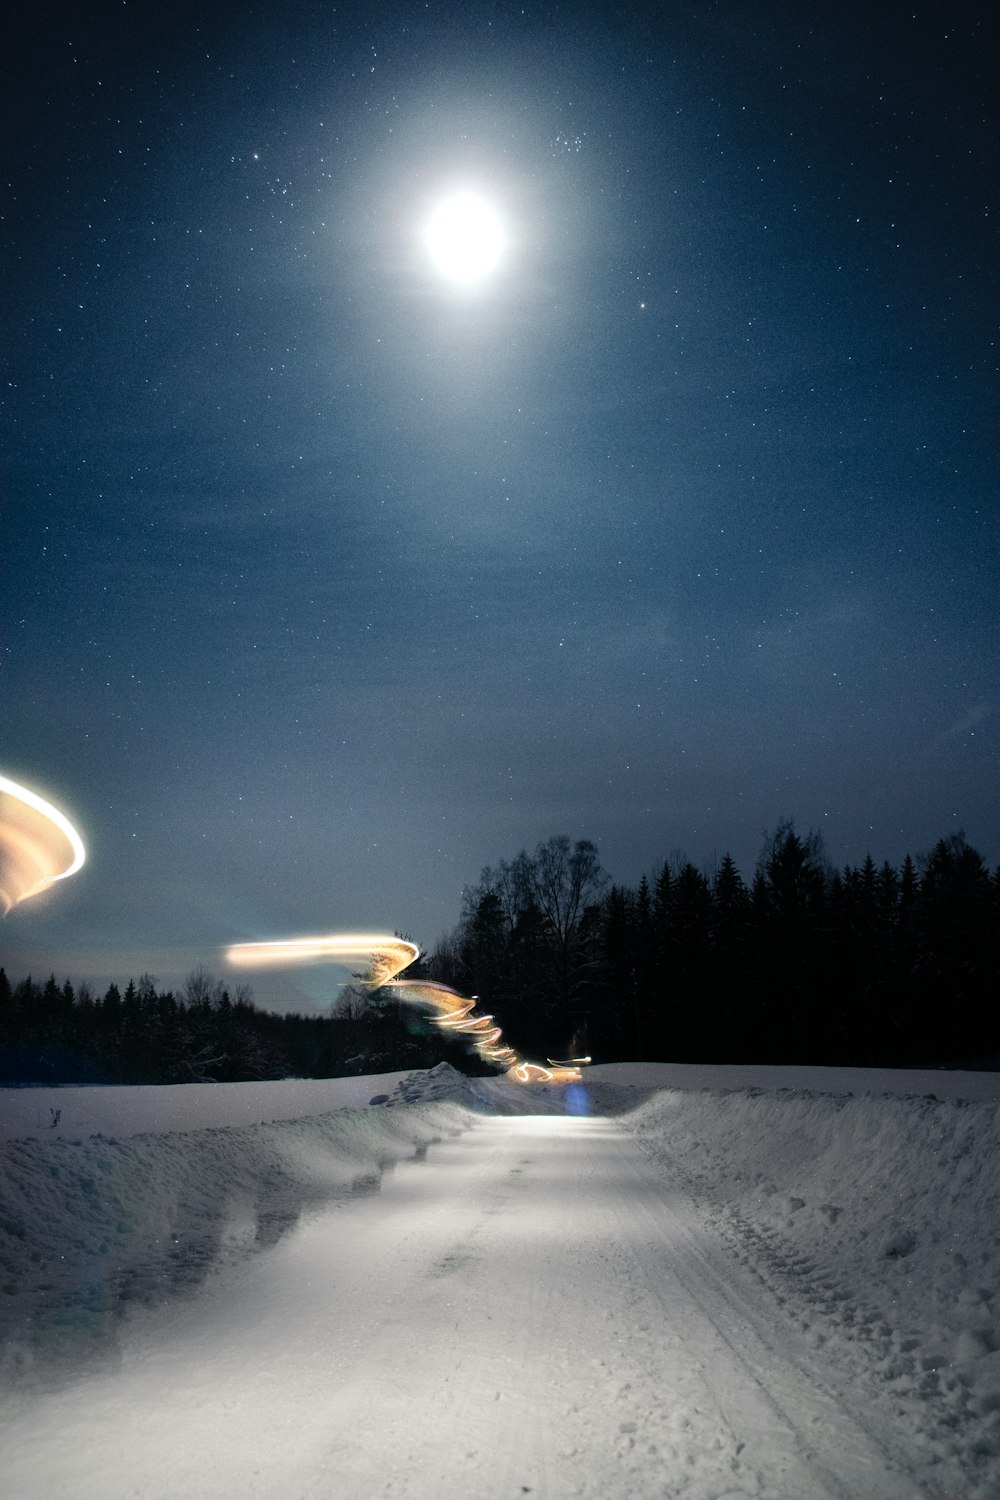 a snowboarder is going down a snowy road at night